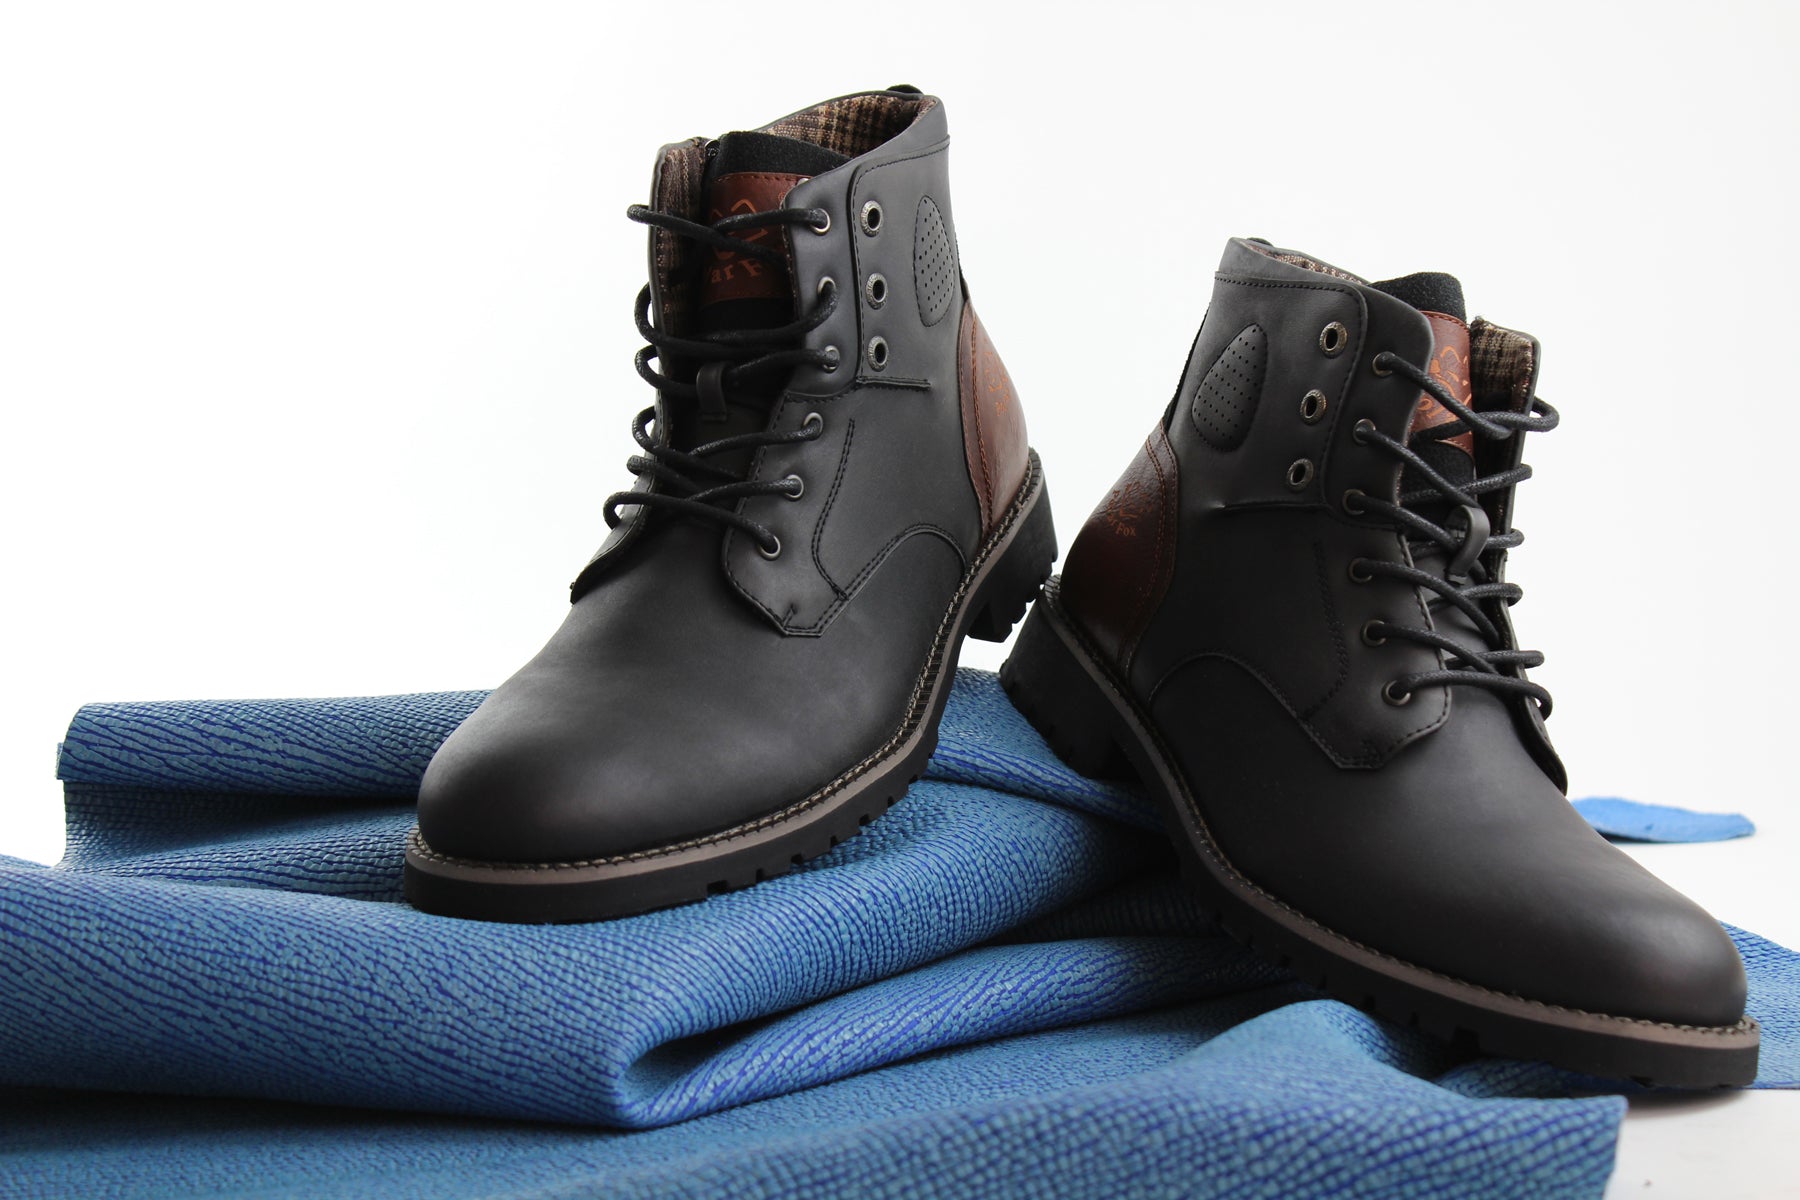 Two-Toned Rugged Boots | Homer by Polar Fox | Conal Footwear | Photographic Paired Angle View